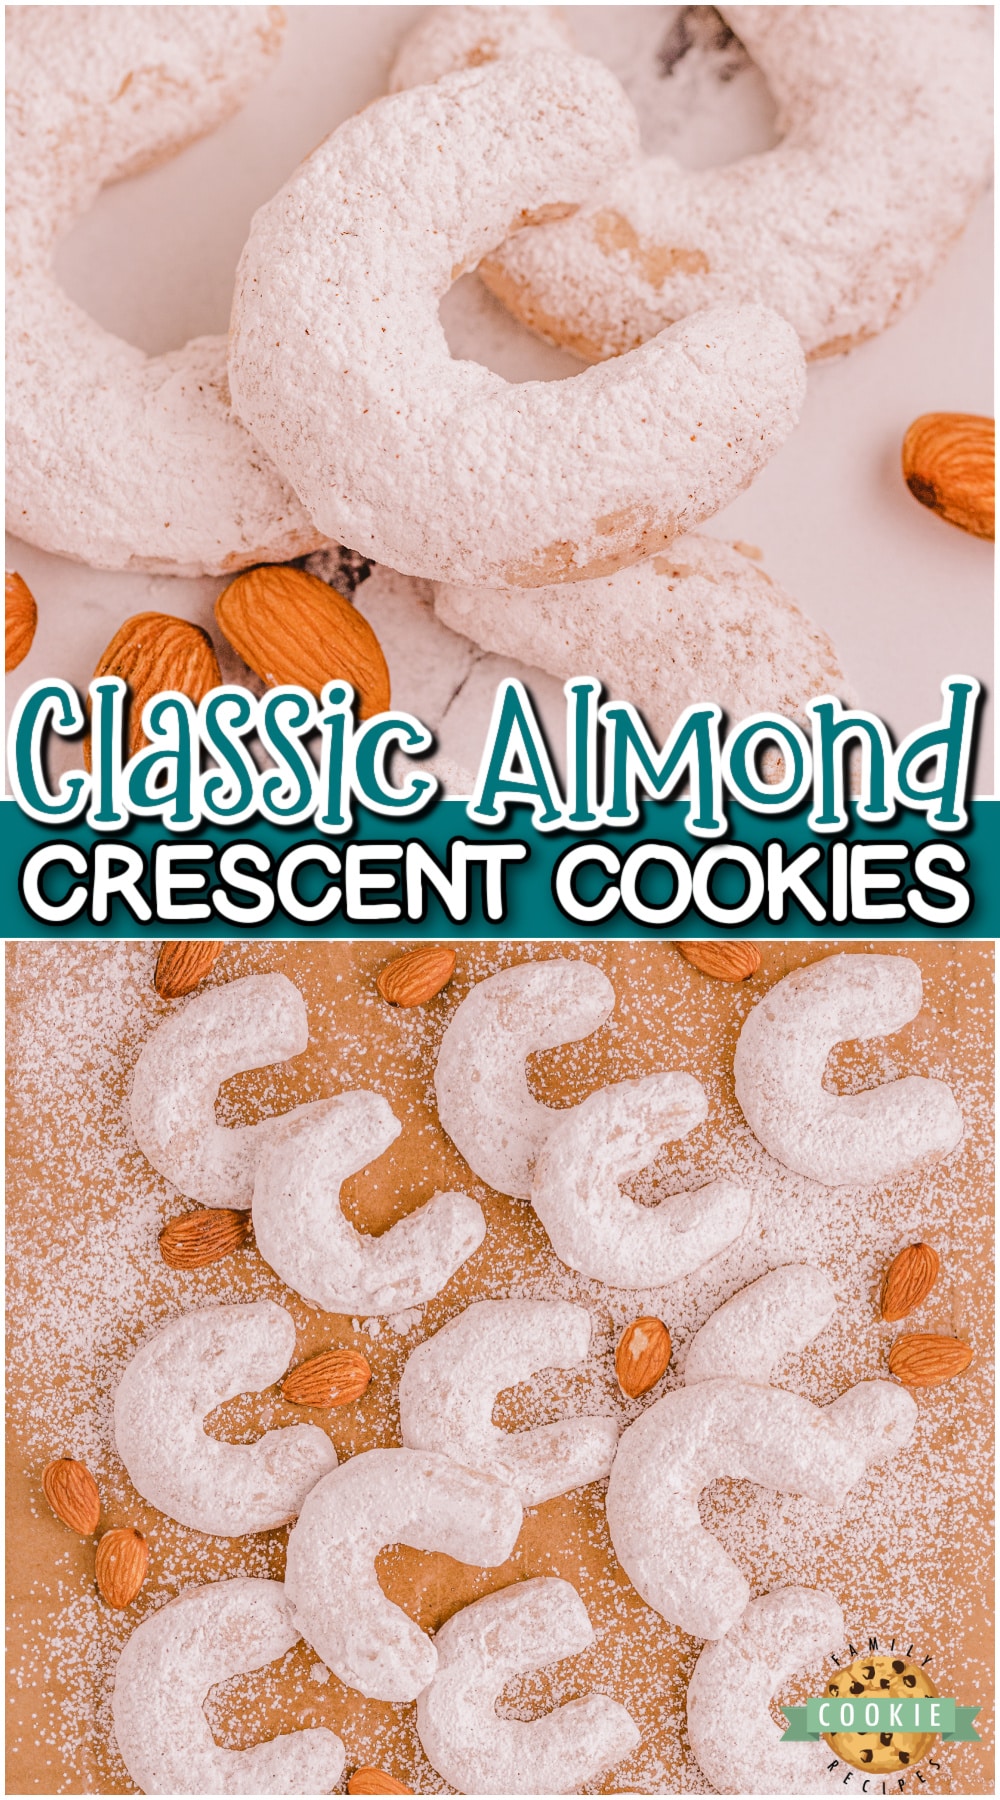 Almond cinnamon crescent cookies are classic buttery shortbread cookies shaped into crescents & rolled in powdered sugar. Perfect cookies beside a cup of tea in cold winter weather!